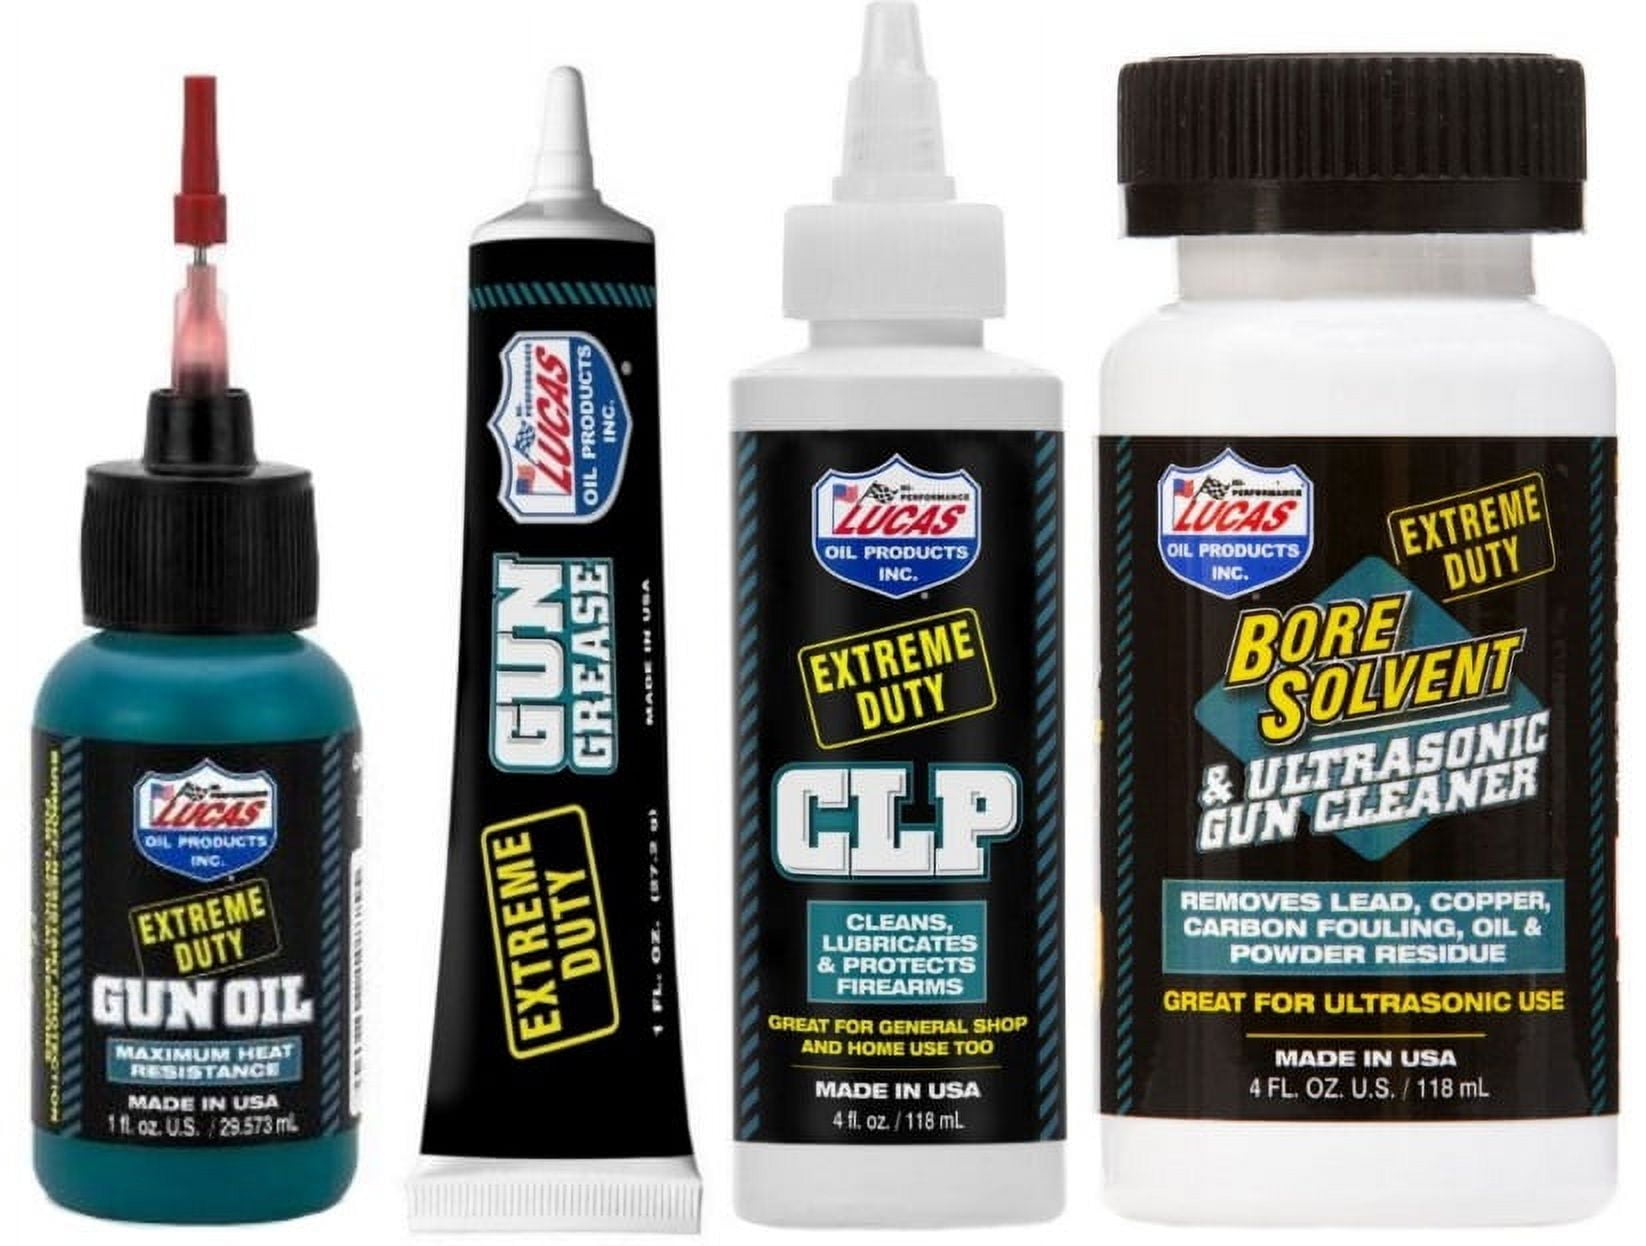 Extreme Duty Gun Cleaner – Lucas Oil Products, Inc. – Keep That Engine  Alive!